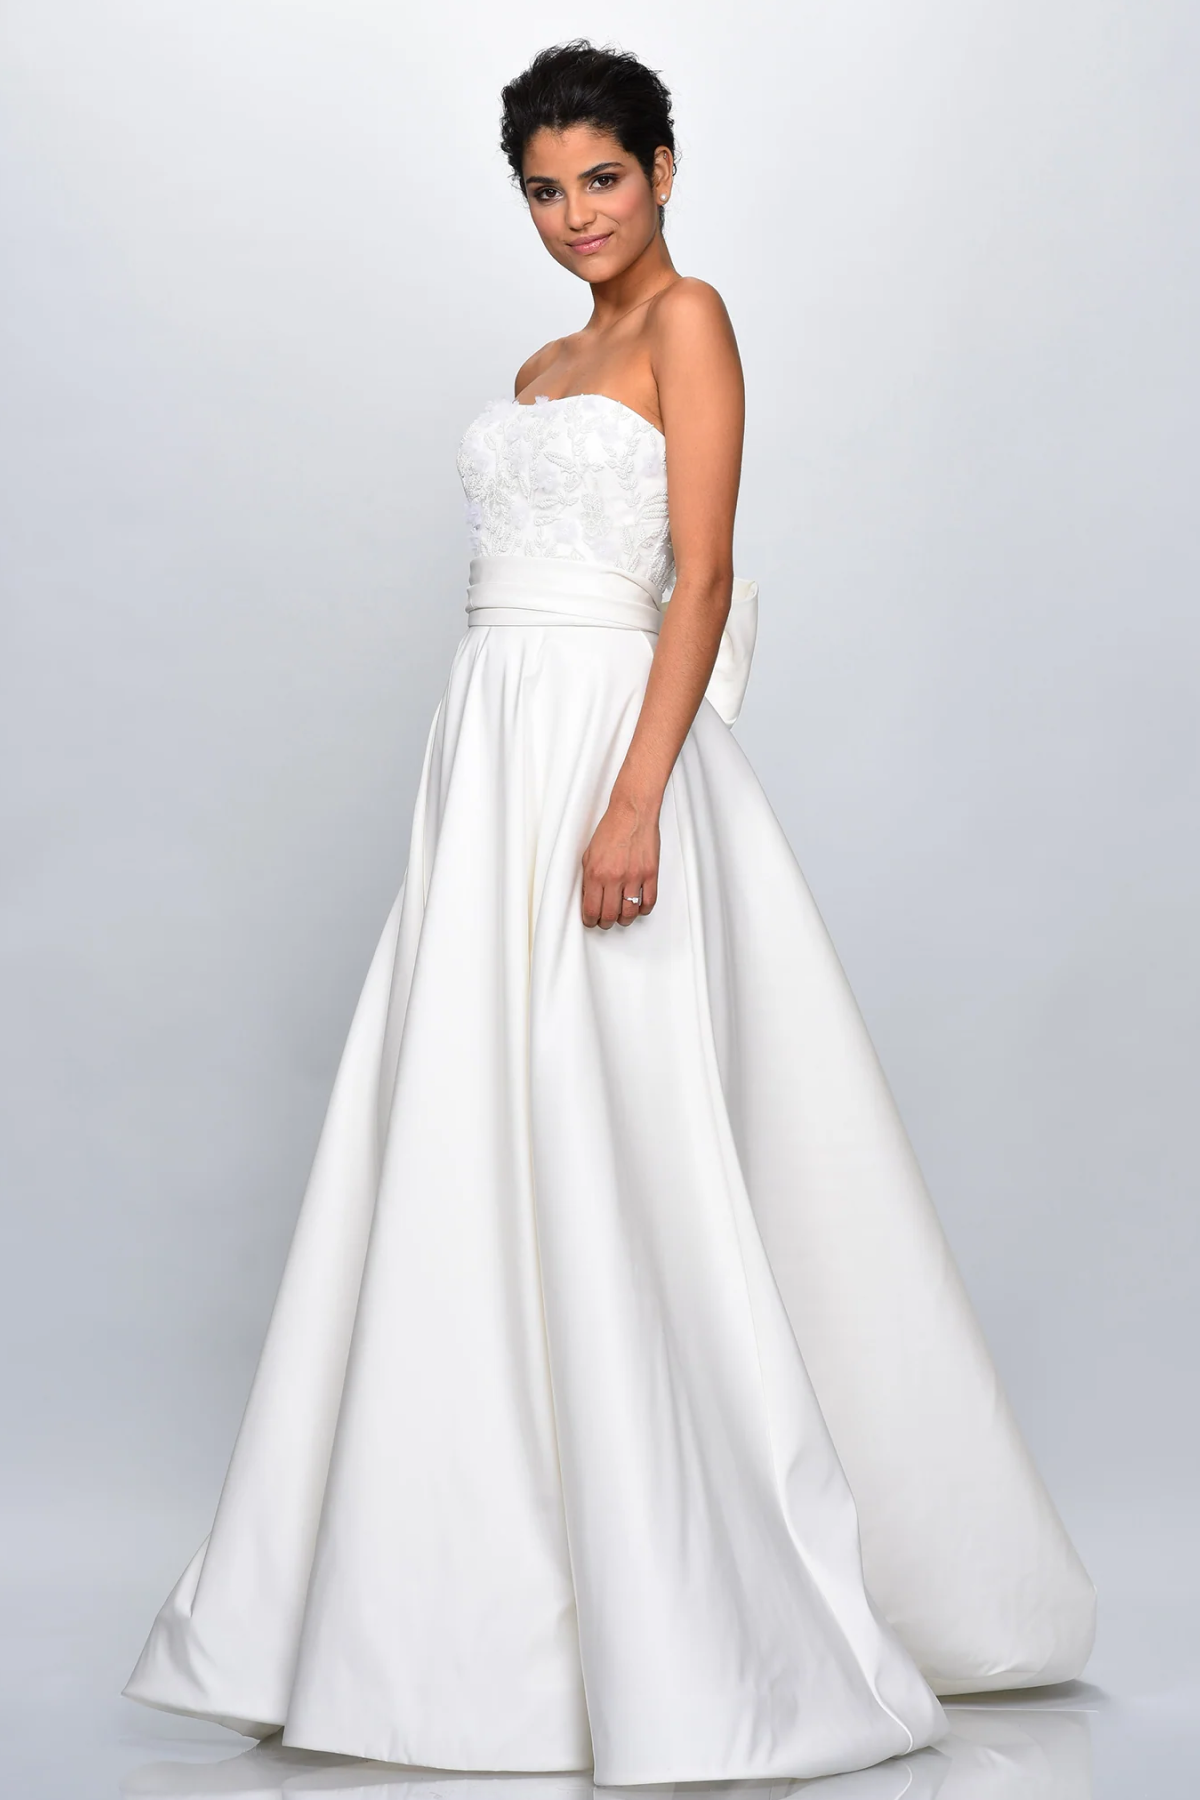 Cassia Gown